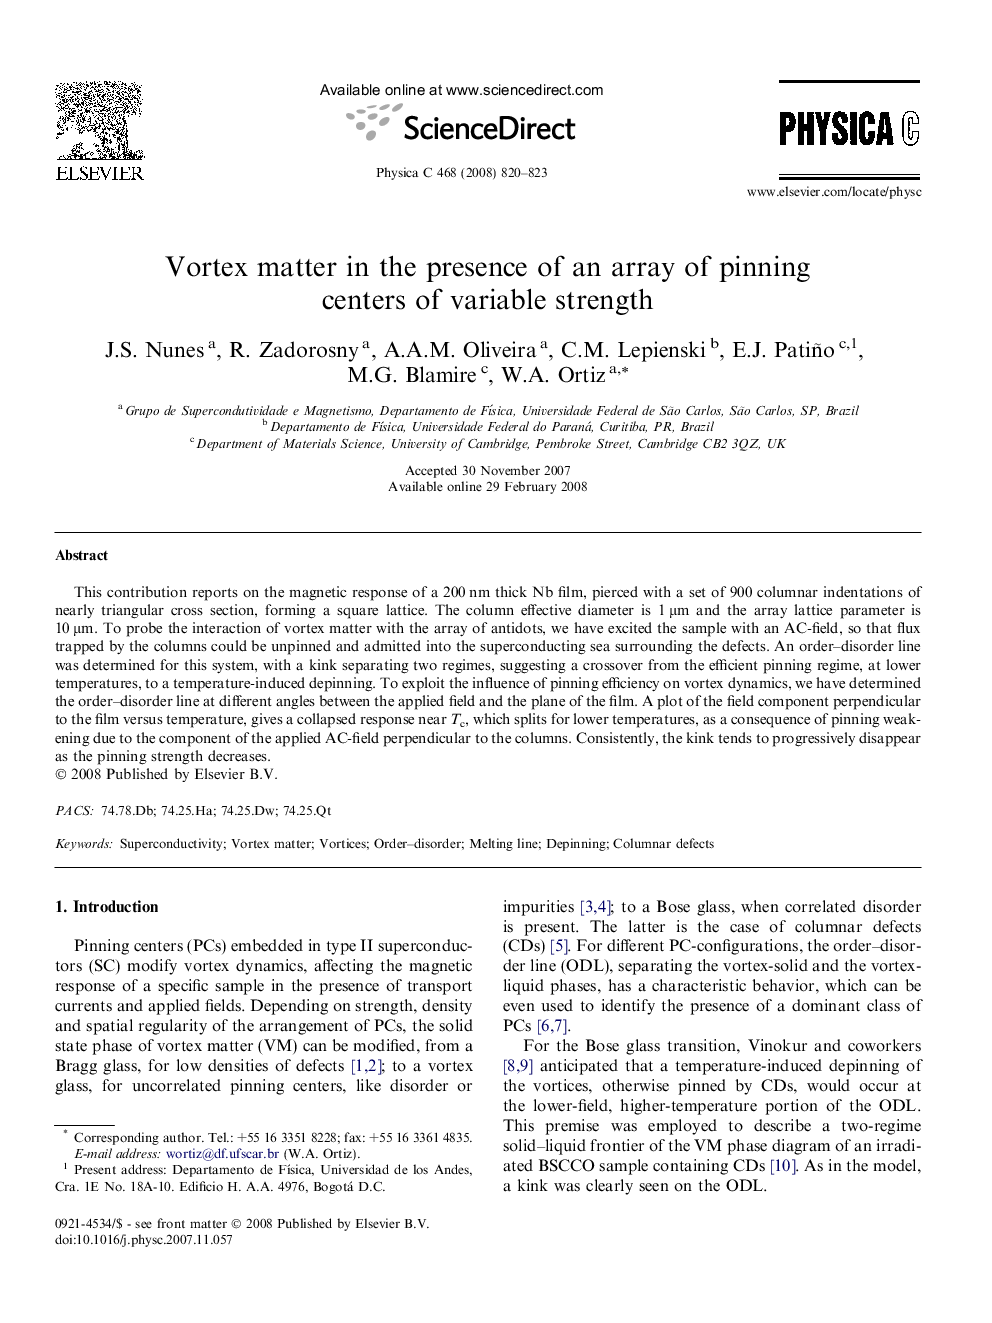 Vortex matter in the presence of an array of pinning centers of variable strength